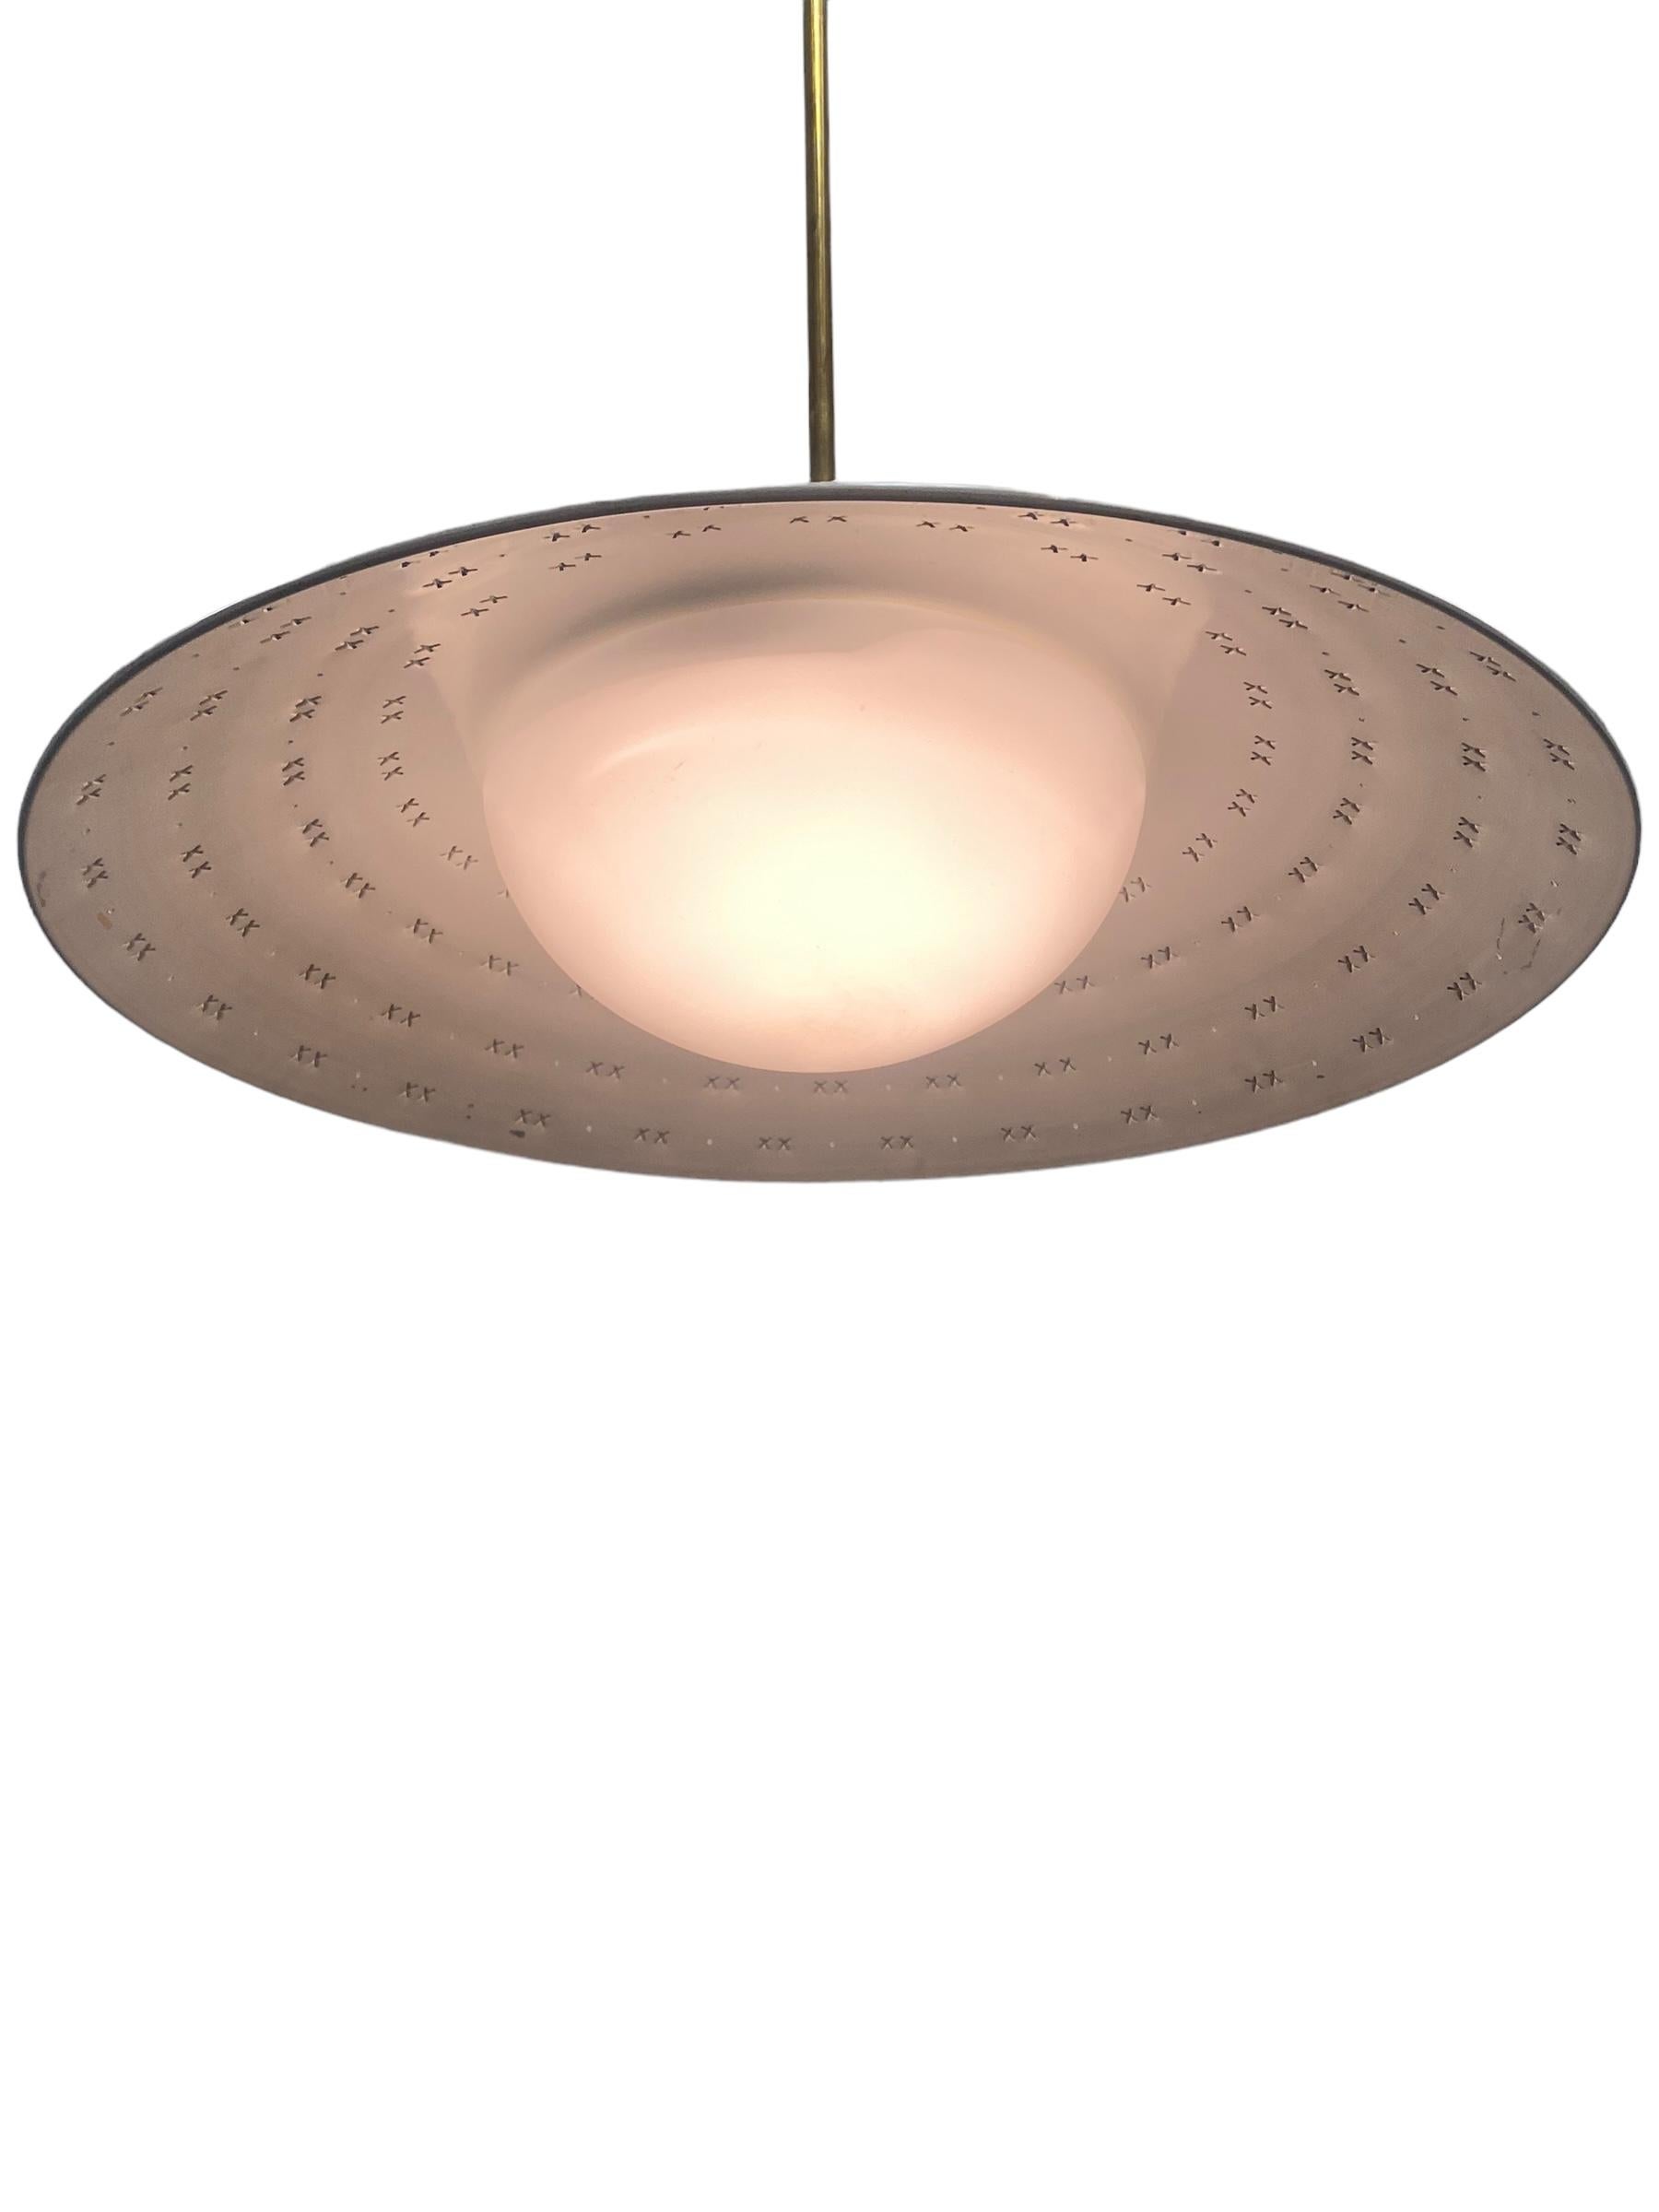 A Rare Lisa-Johansson Pape Ceiling Lamp FN 03-433, Orno 1950s In Good Condition In Helsinki, FI